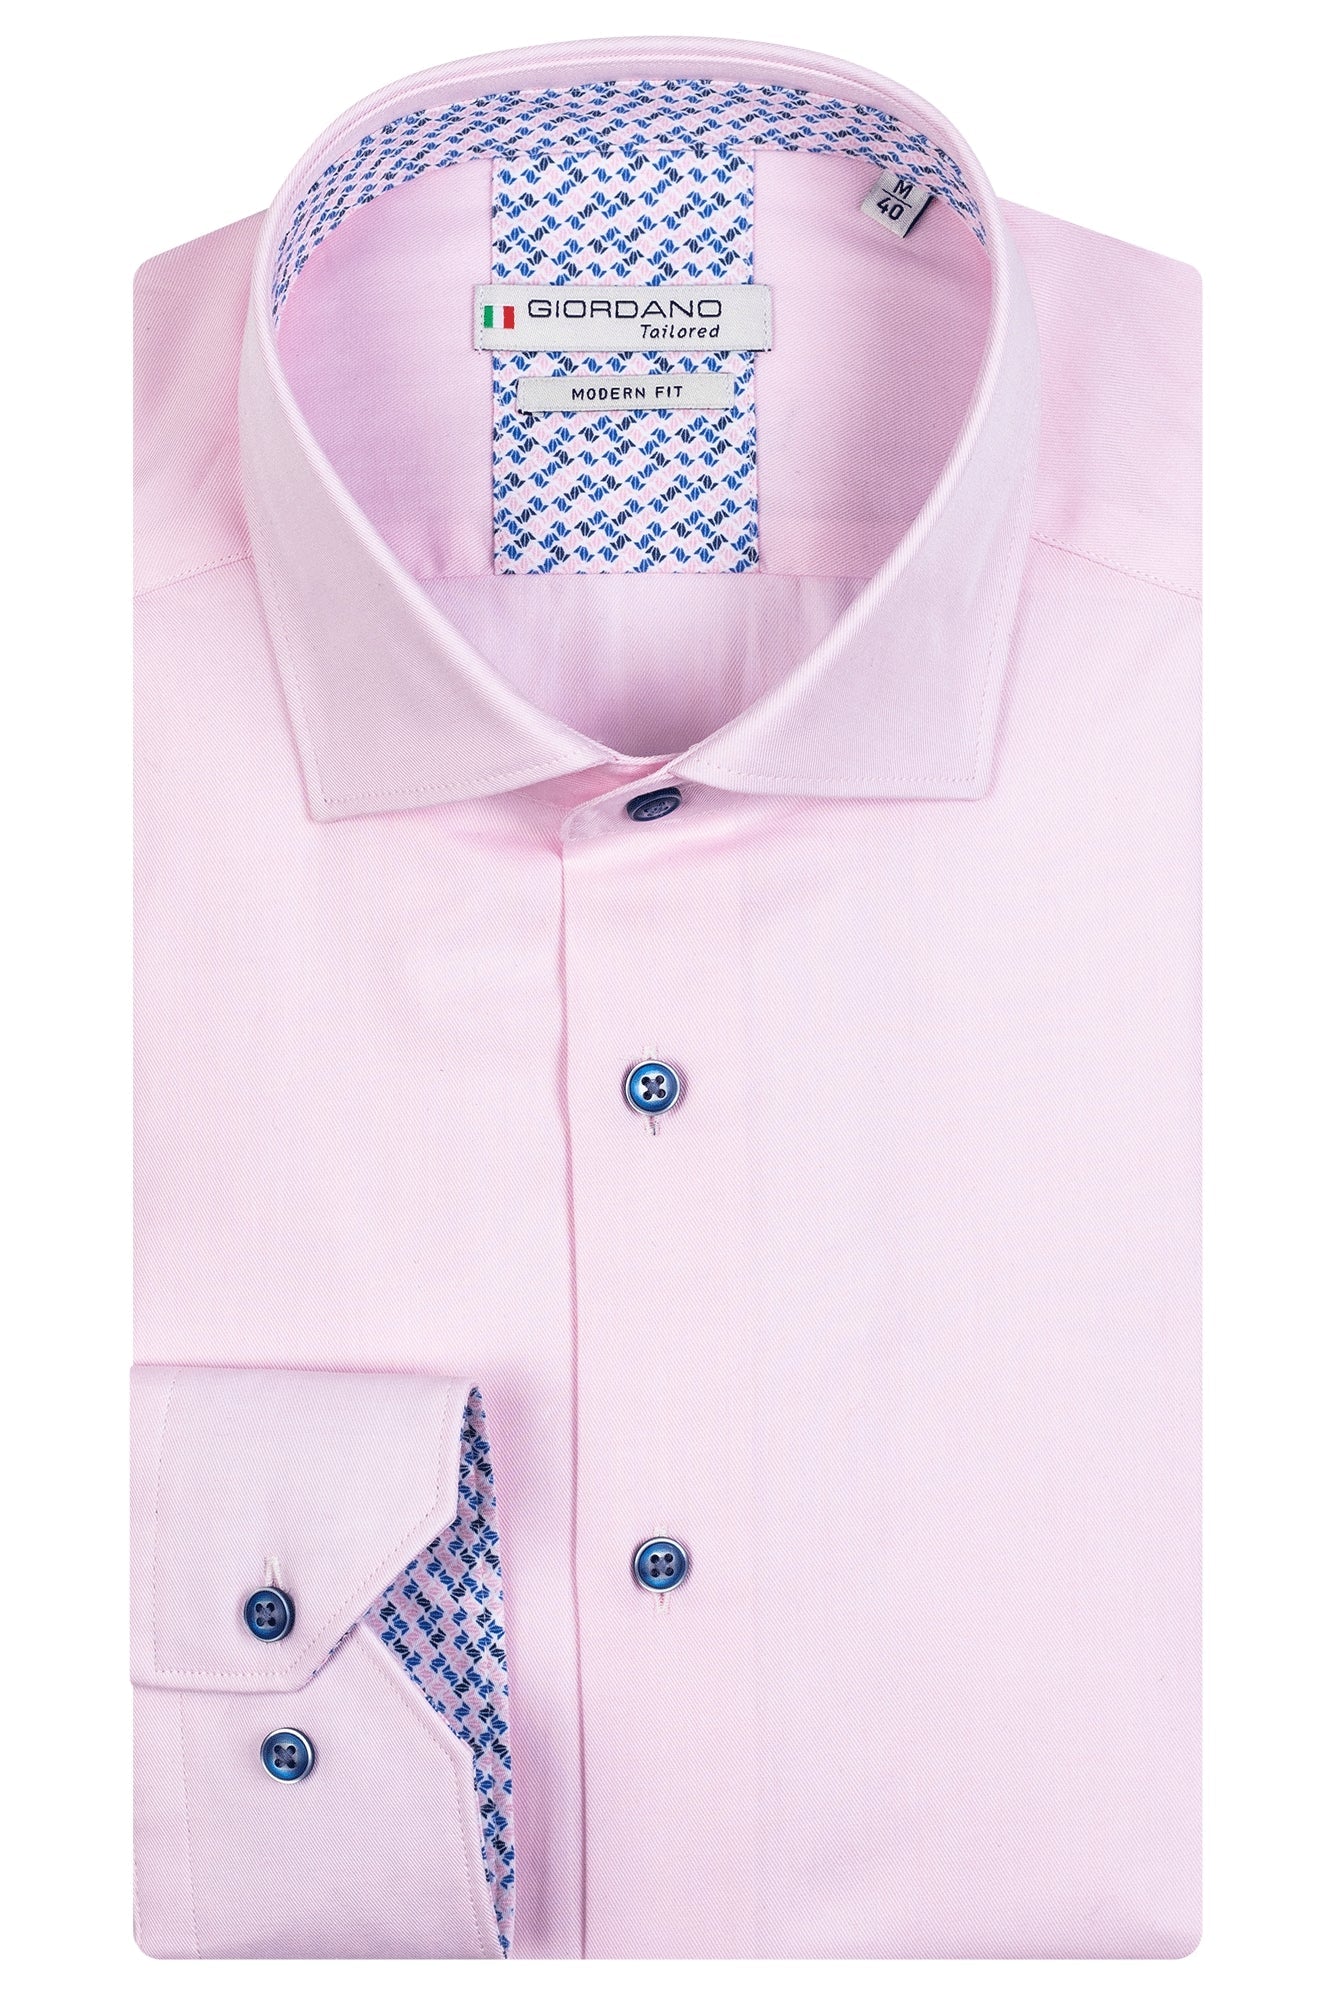 Giordano 100% cotton shirt. Light pink shirt with blue buttons. The perfect summer light shirt. Dressed casually not tucked in, or more formal tucked in. Great paired with jeans and chinos but also shorts.